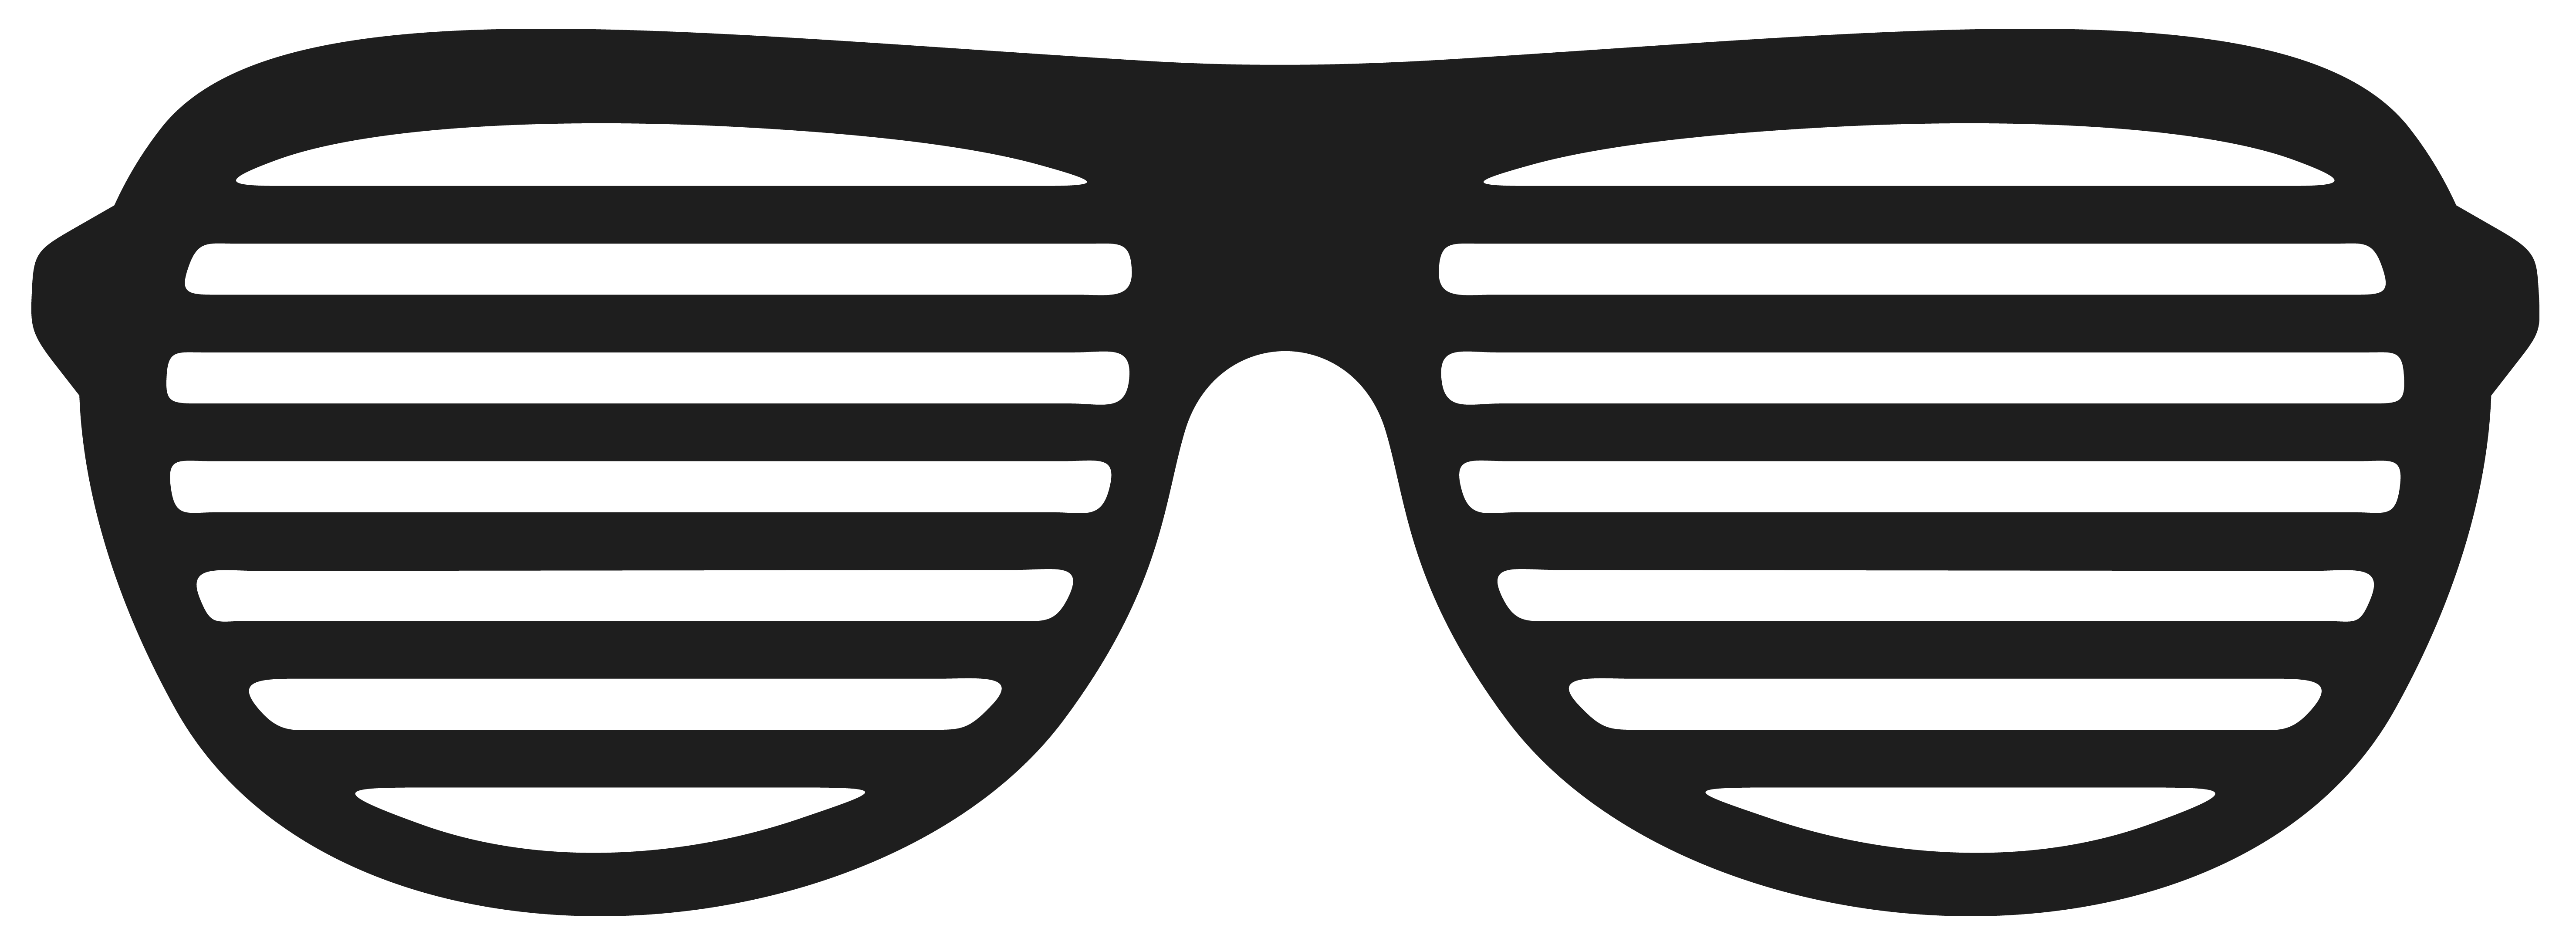 Shutter Sunglasses Shades Aviator Free Download PNG HD Clipart